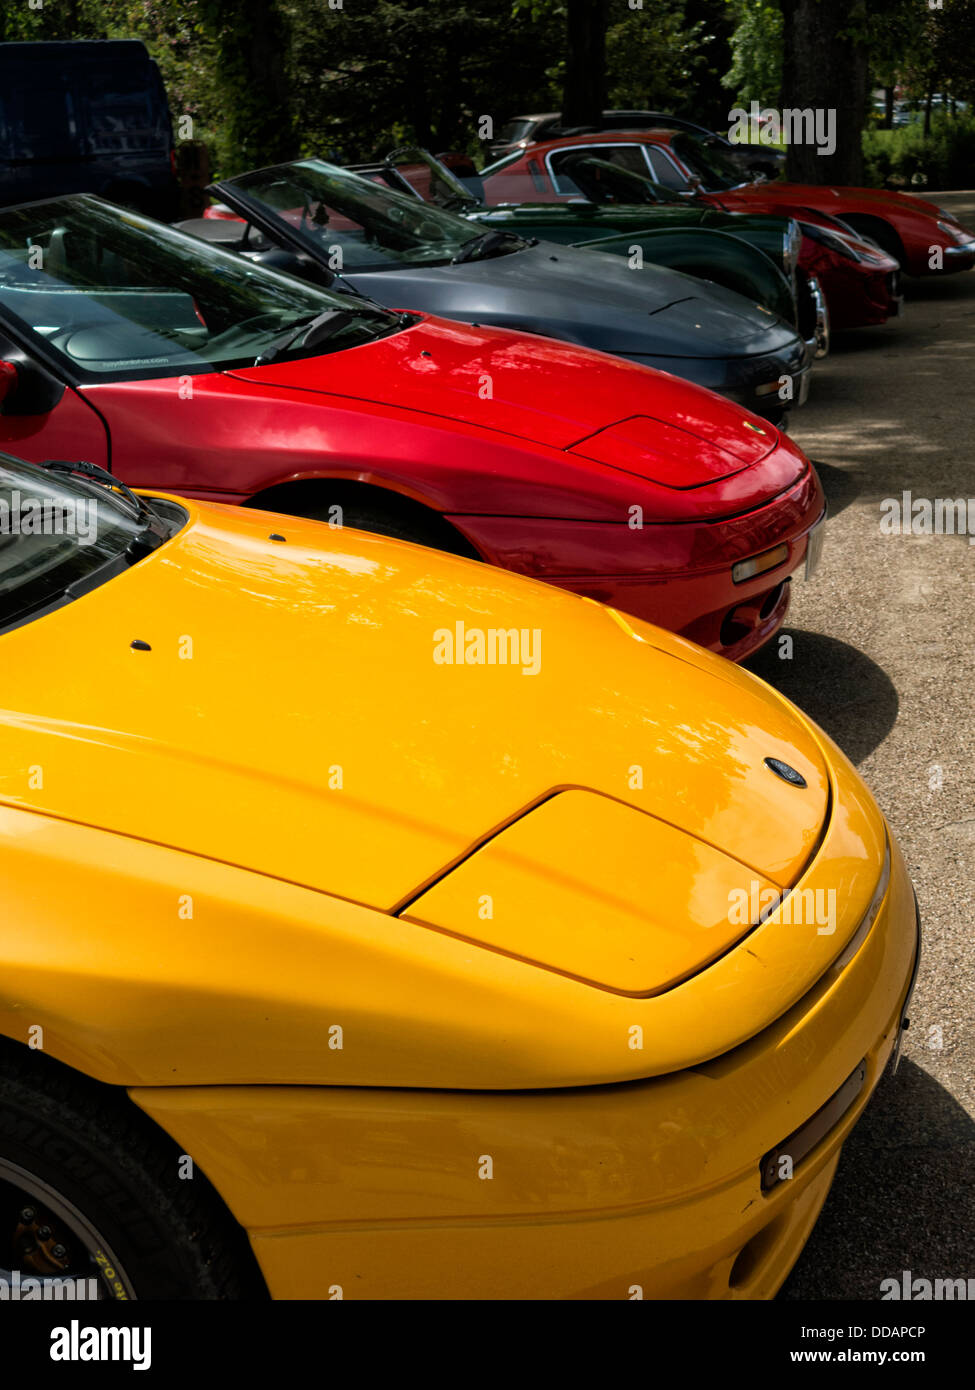 Different colored bonnets of Lotus sports cars on display at classic car  rally Buxton Derbyshire England Stock Photo - Alamy